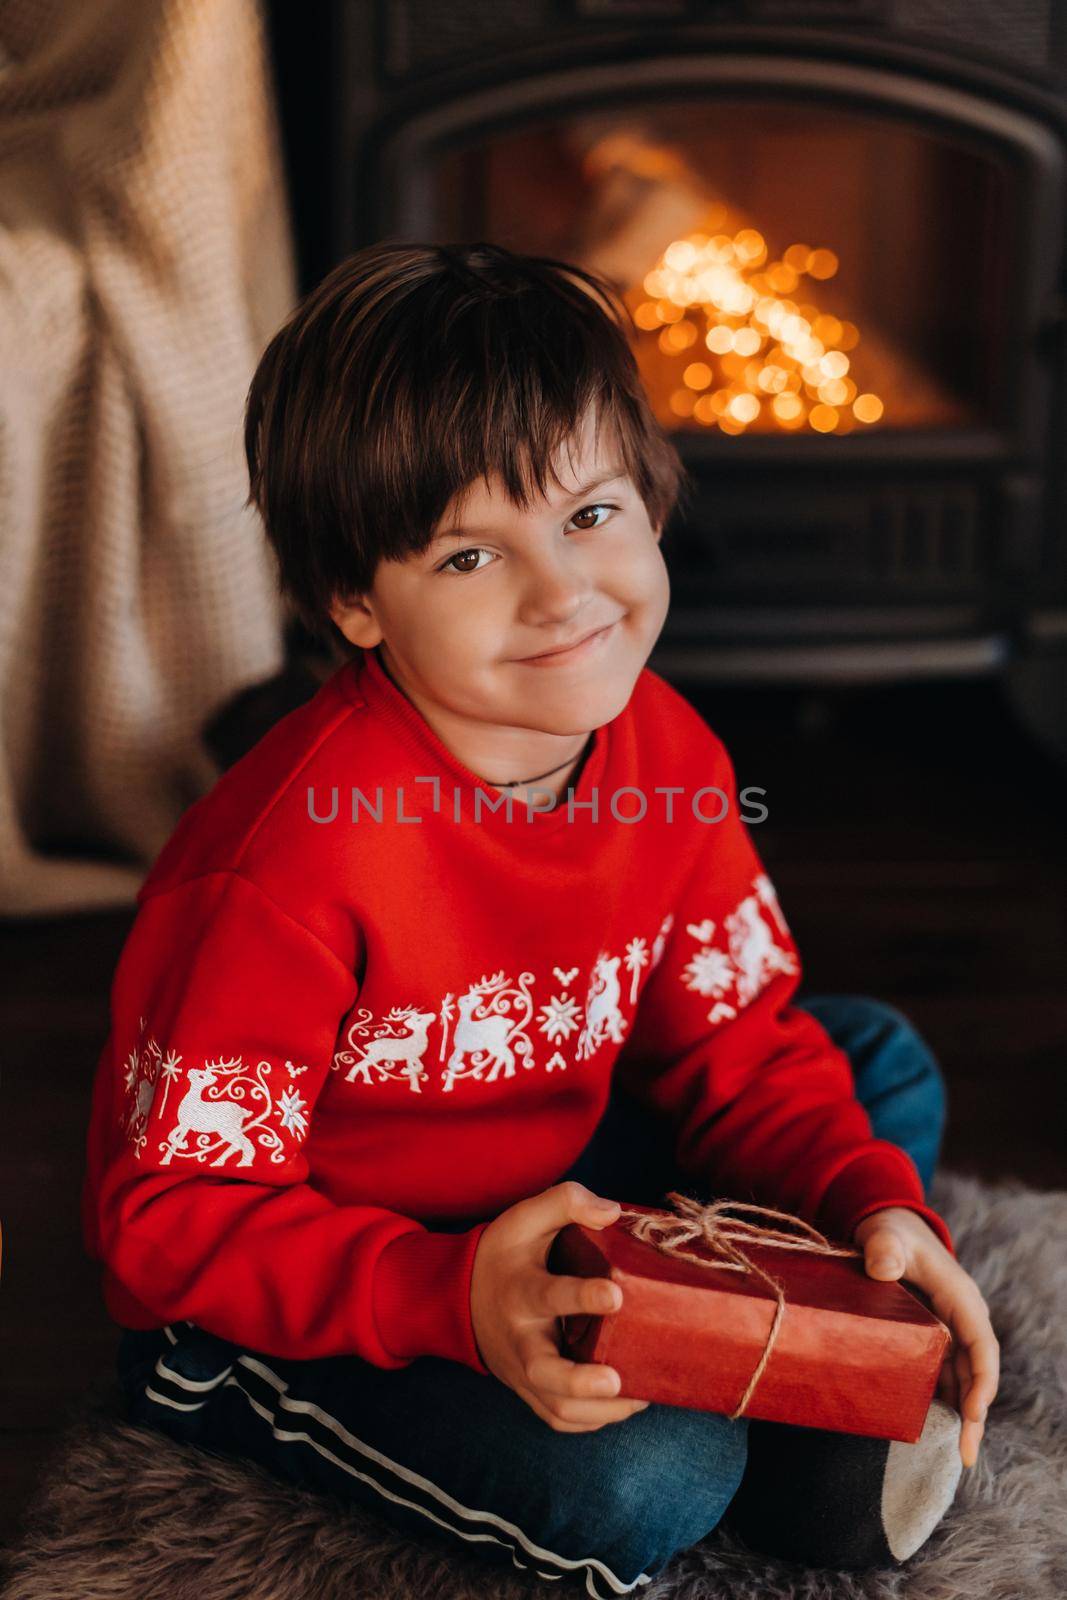 portrait of a smiling boy with a gift in his hands near the fireplace at home by Lobachad